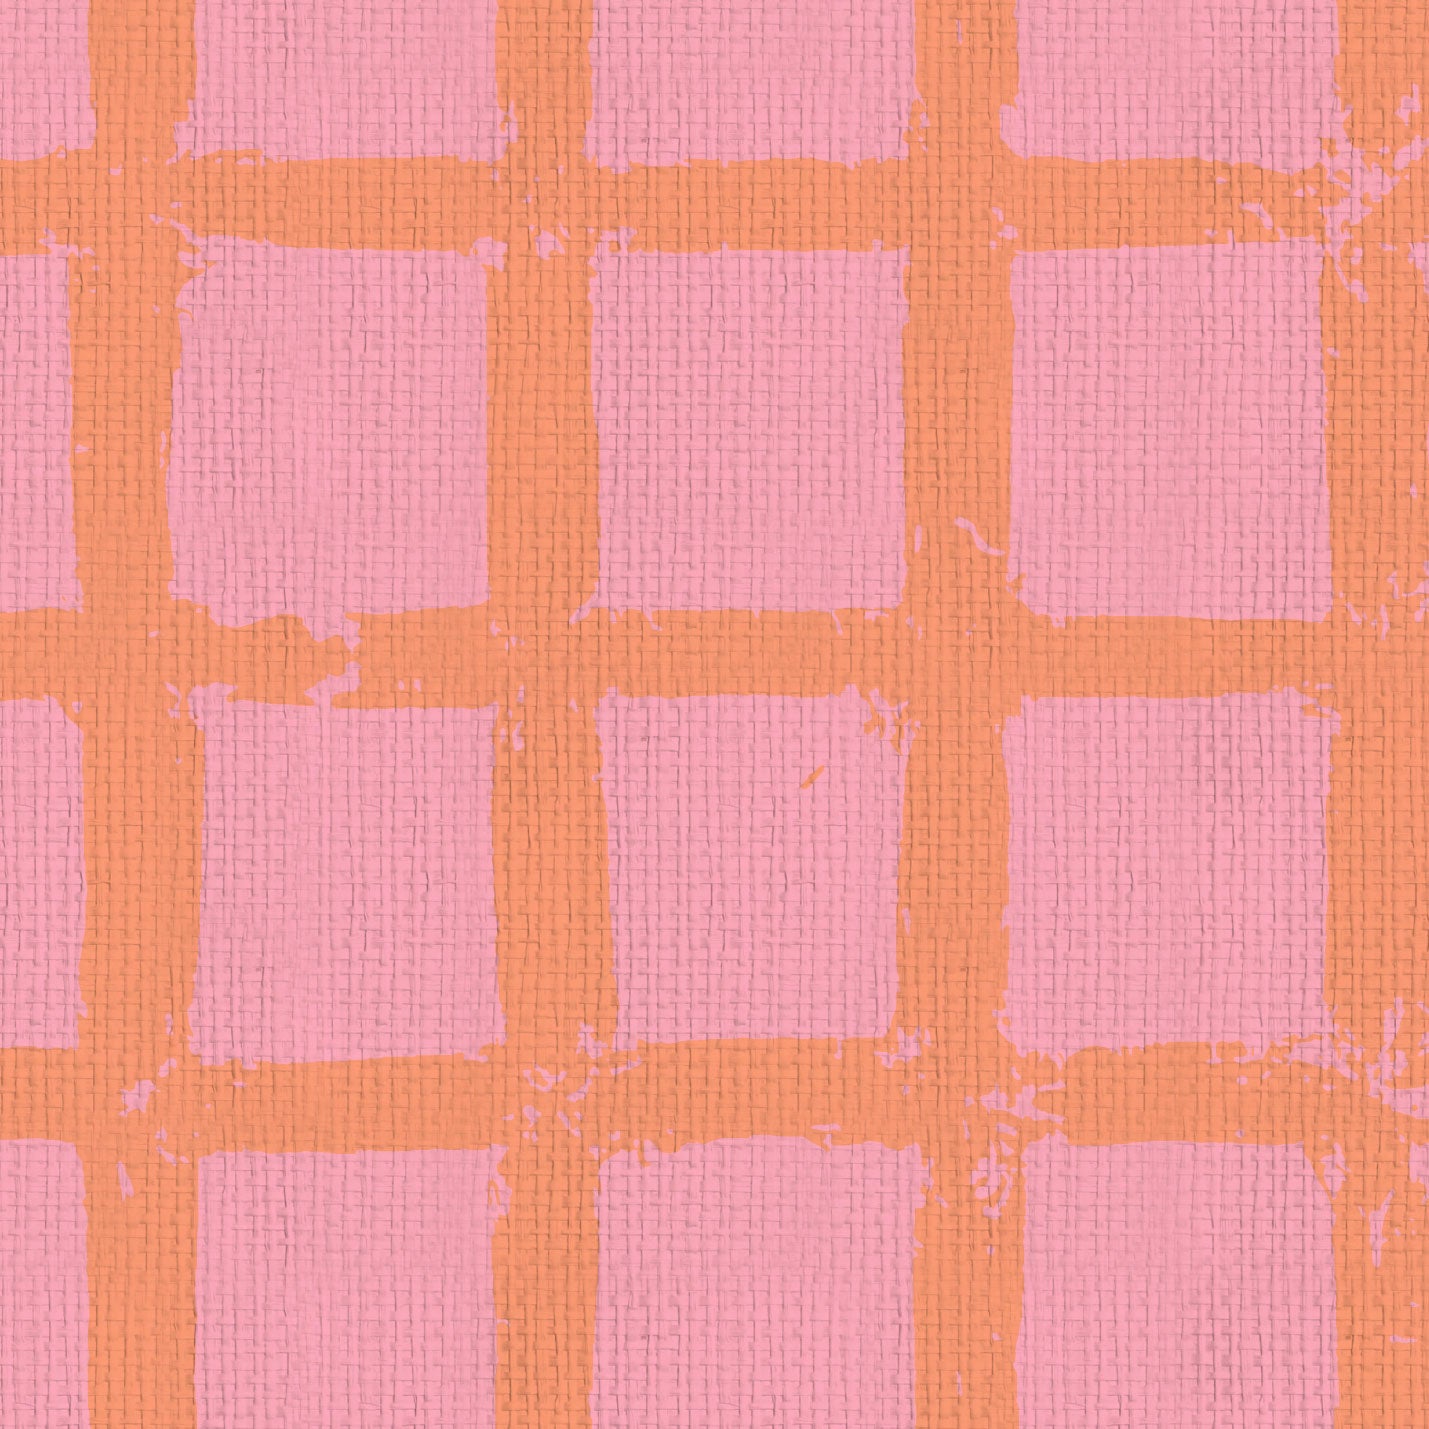 paper weave paperweave wallpaper in hand painted square pattern emulating window panes in an oversized plaid layout with a french blue base on cream printGrasscloth wallpaper Natural Textured Eco-Friendly Non-toxic High-quality Sustainable Interior Design Bold Custom Tailor-made Retro chic Bold coastal pink orange coral red hot pink